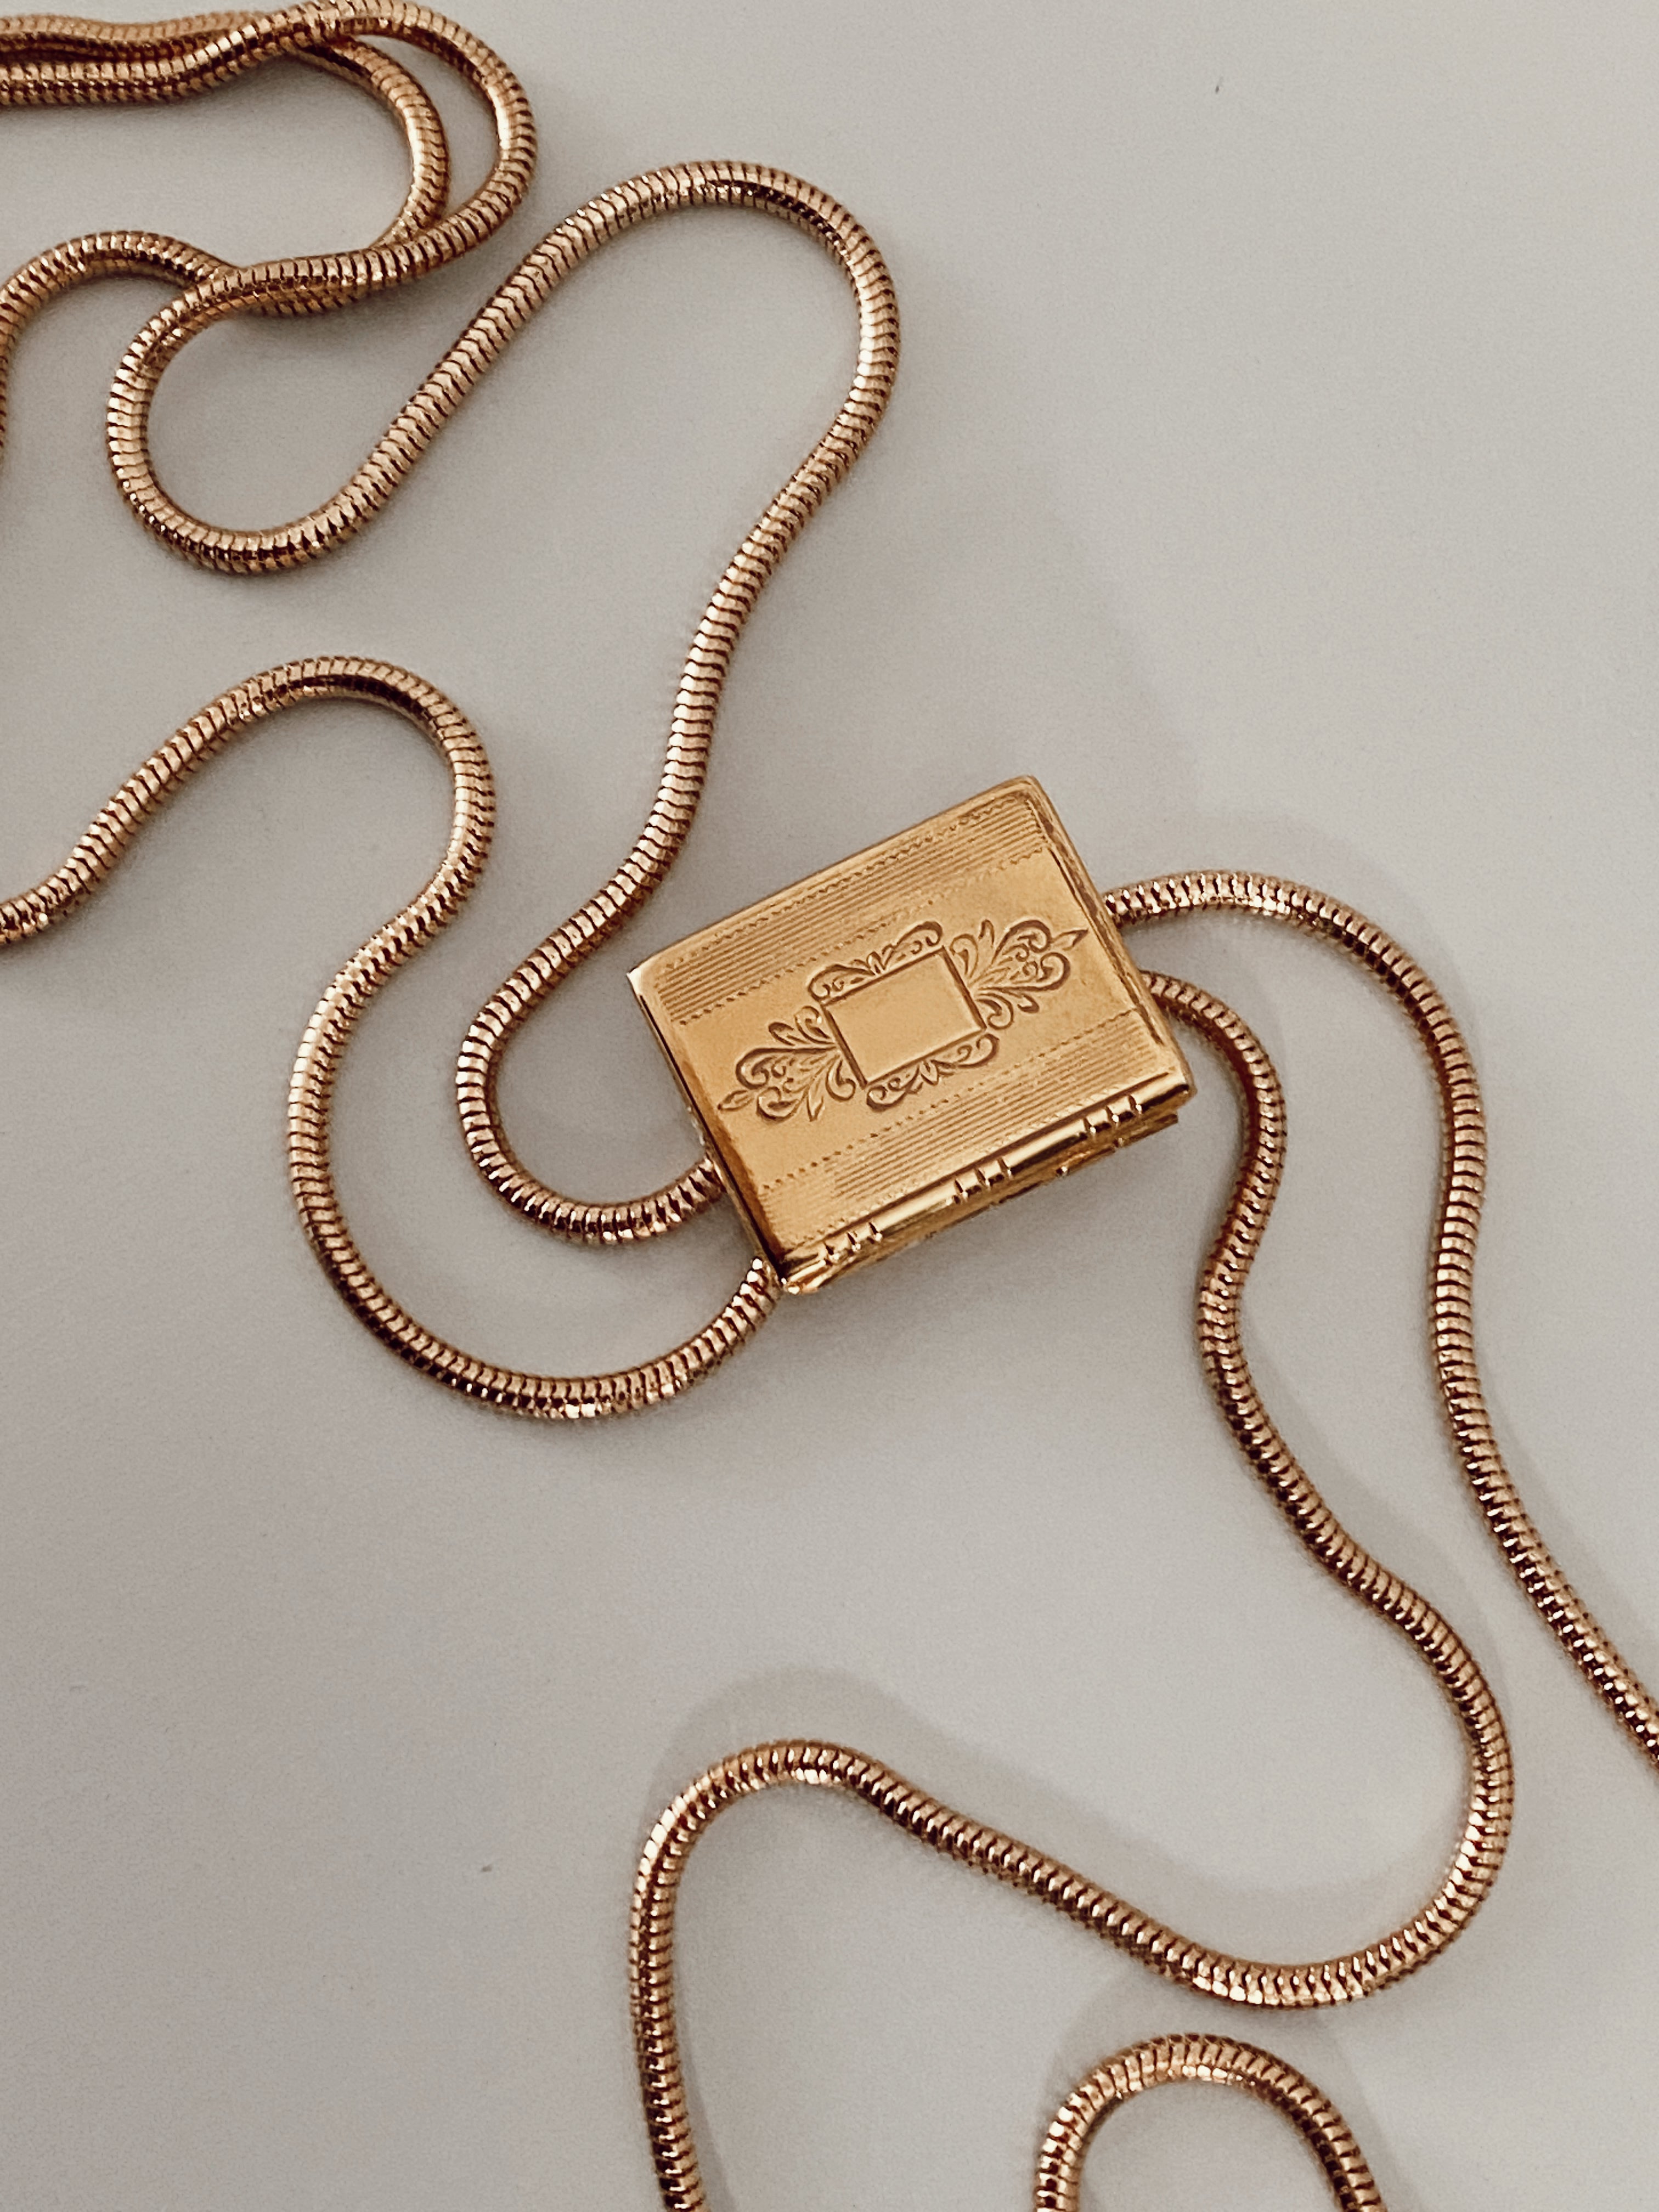 Square Etched Locket Bolo Tie